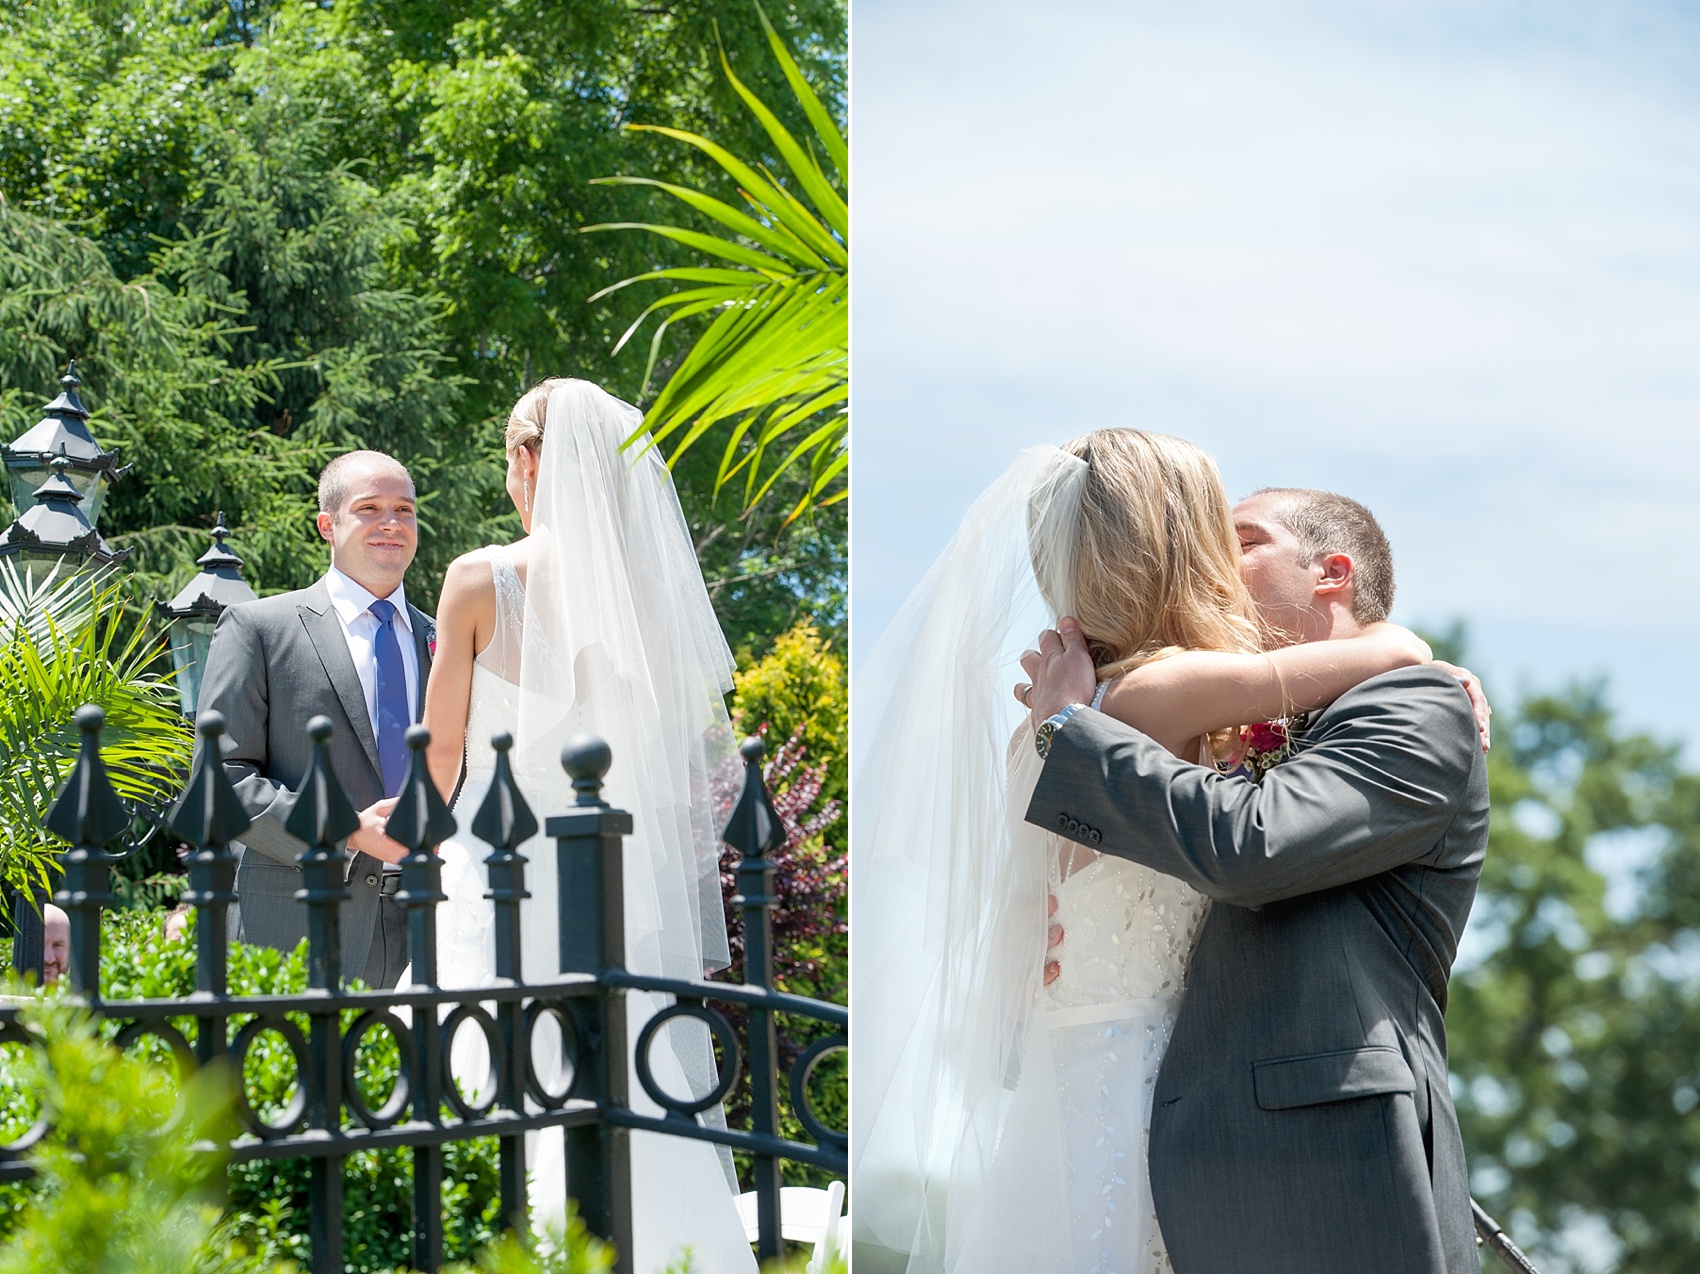 Outdoor summer wedding ceremony and first kiss at The Park Savoy in New Jersey. Photo by Mikkel Paige Photography.